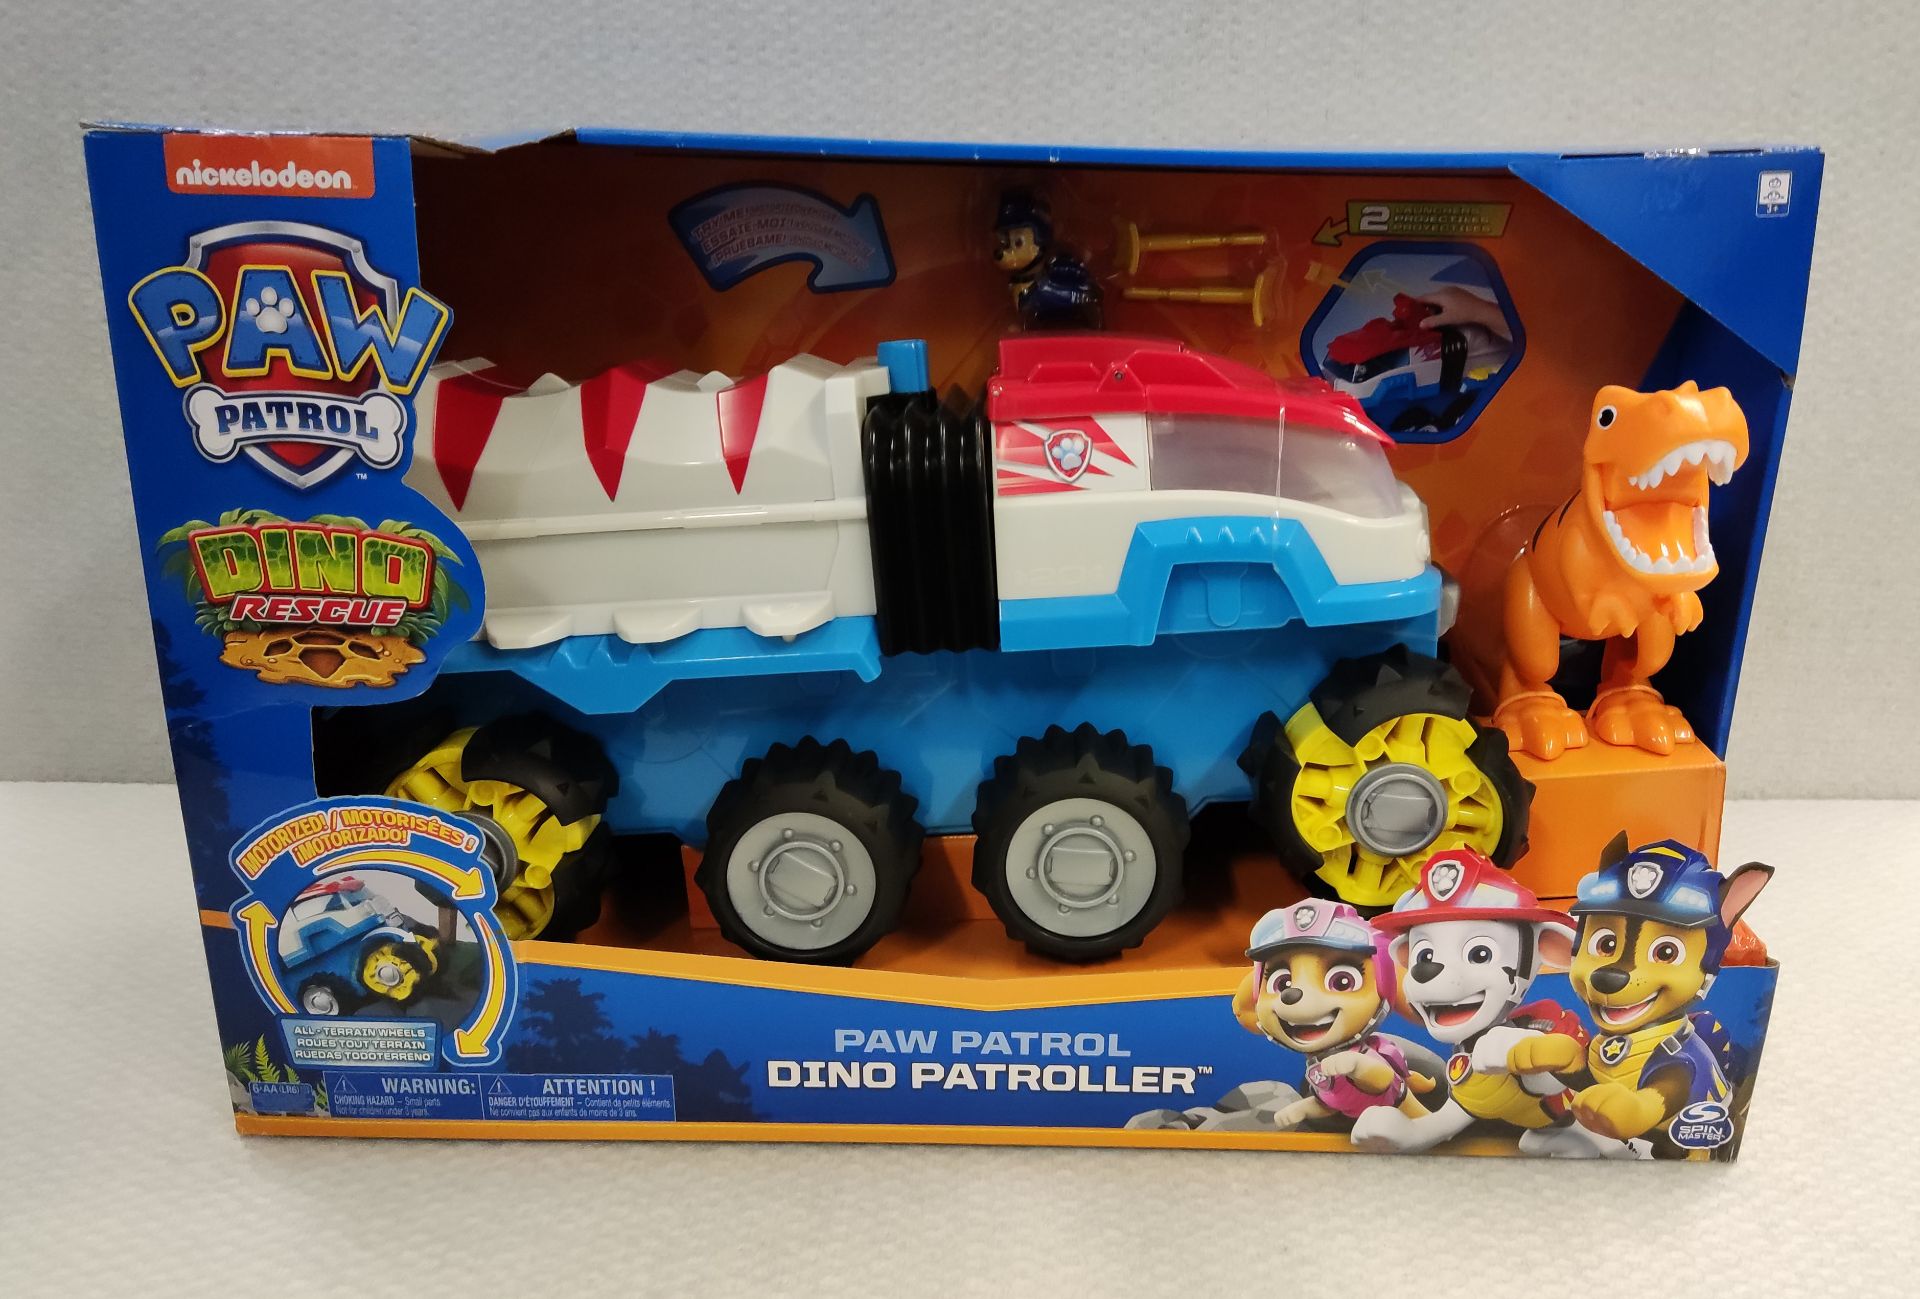 1 x Paw Patrol Dino Patroller Dino Rescue Vehicle - New/Boxed - Image 2 of 7